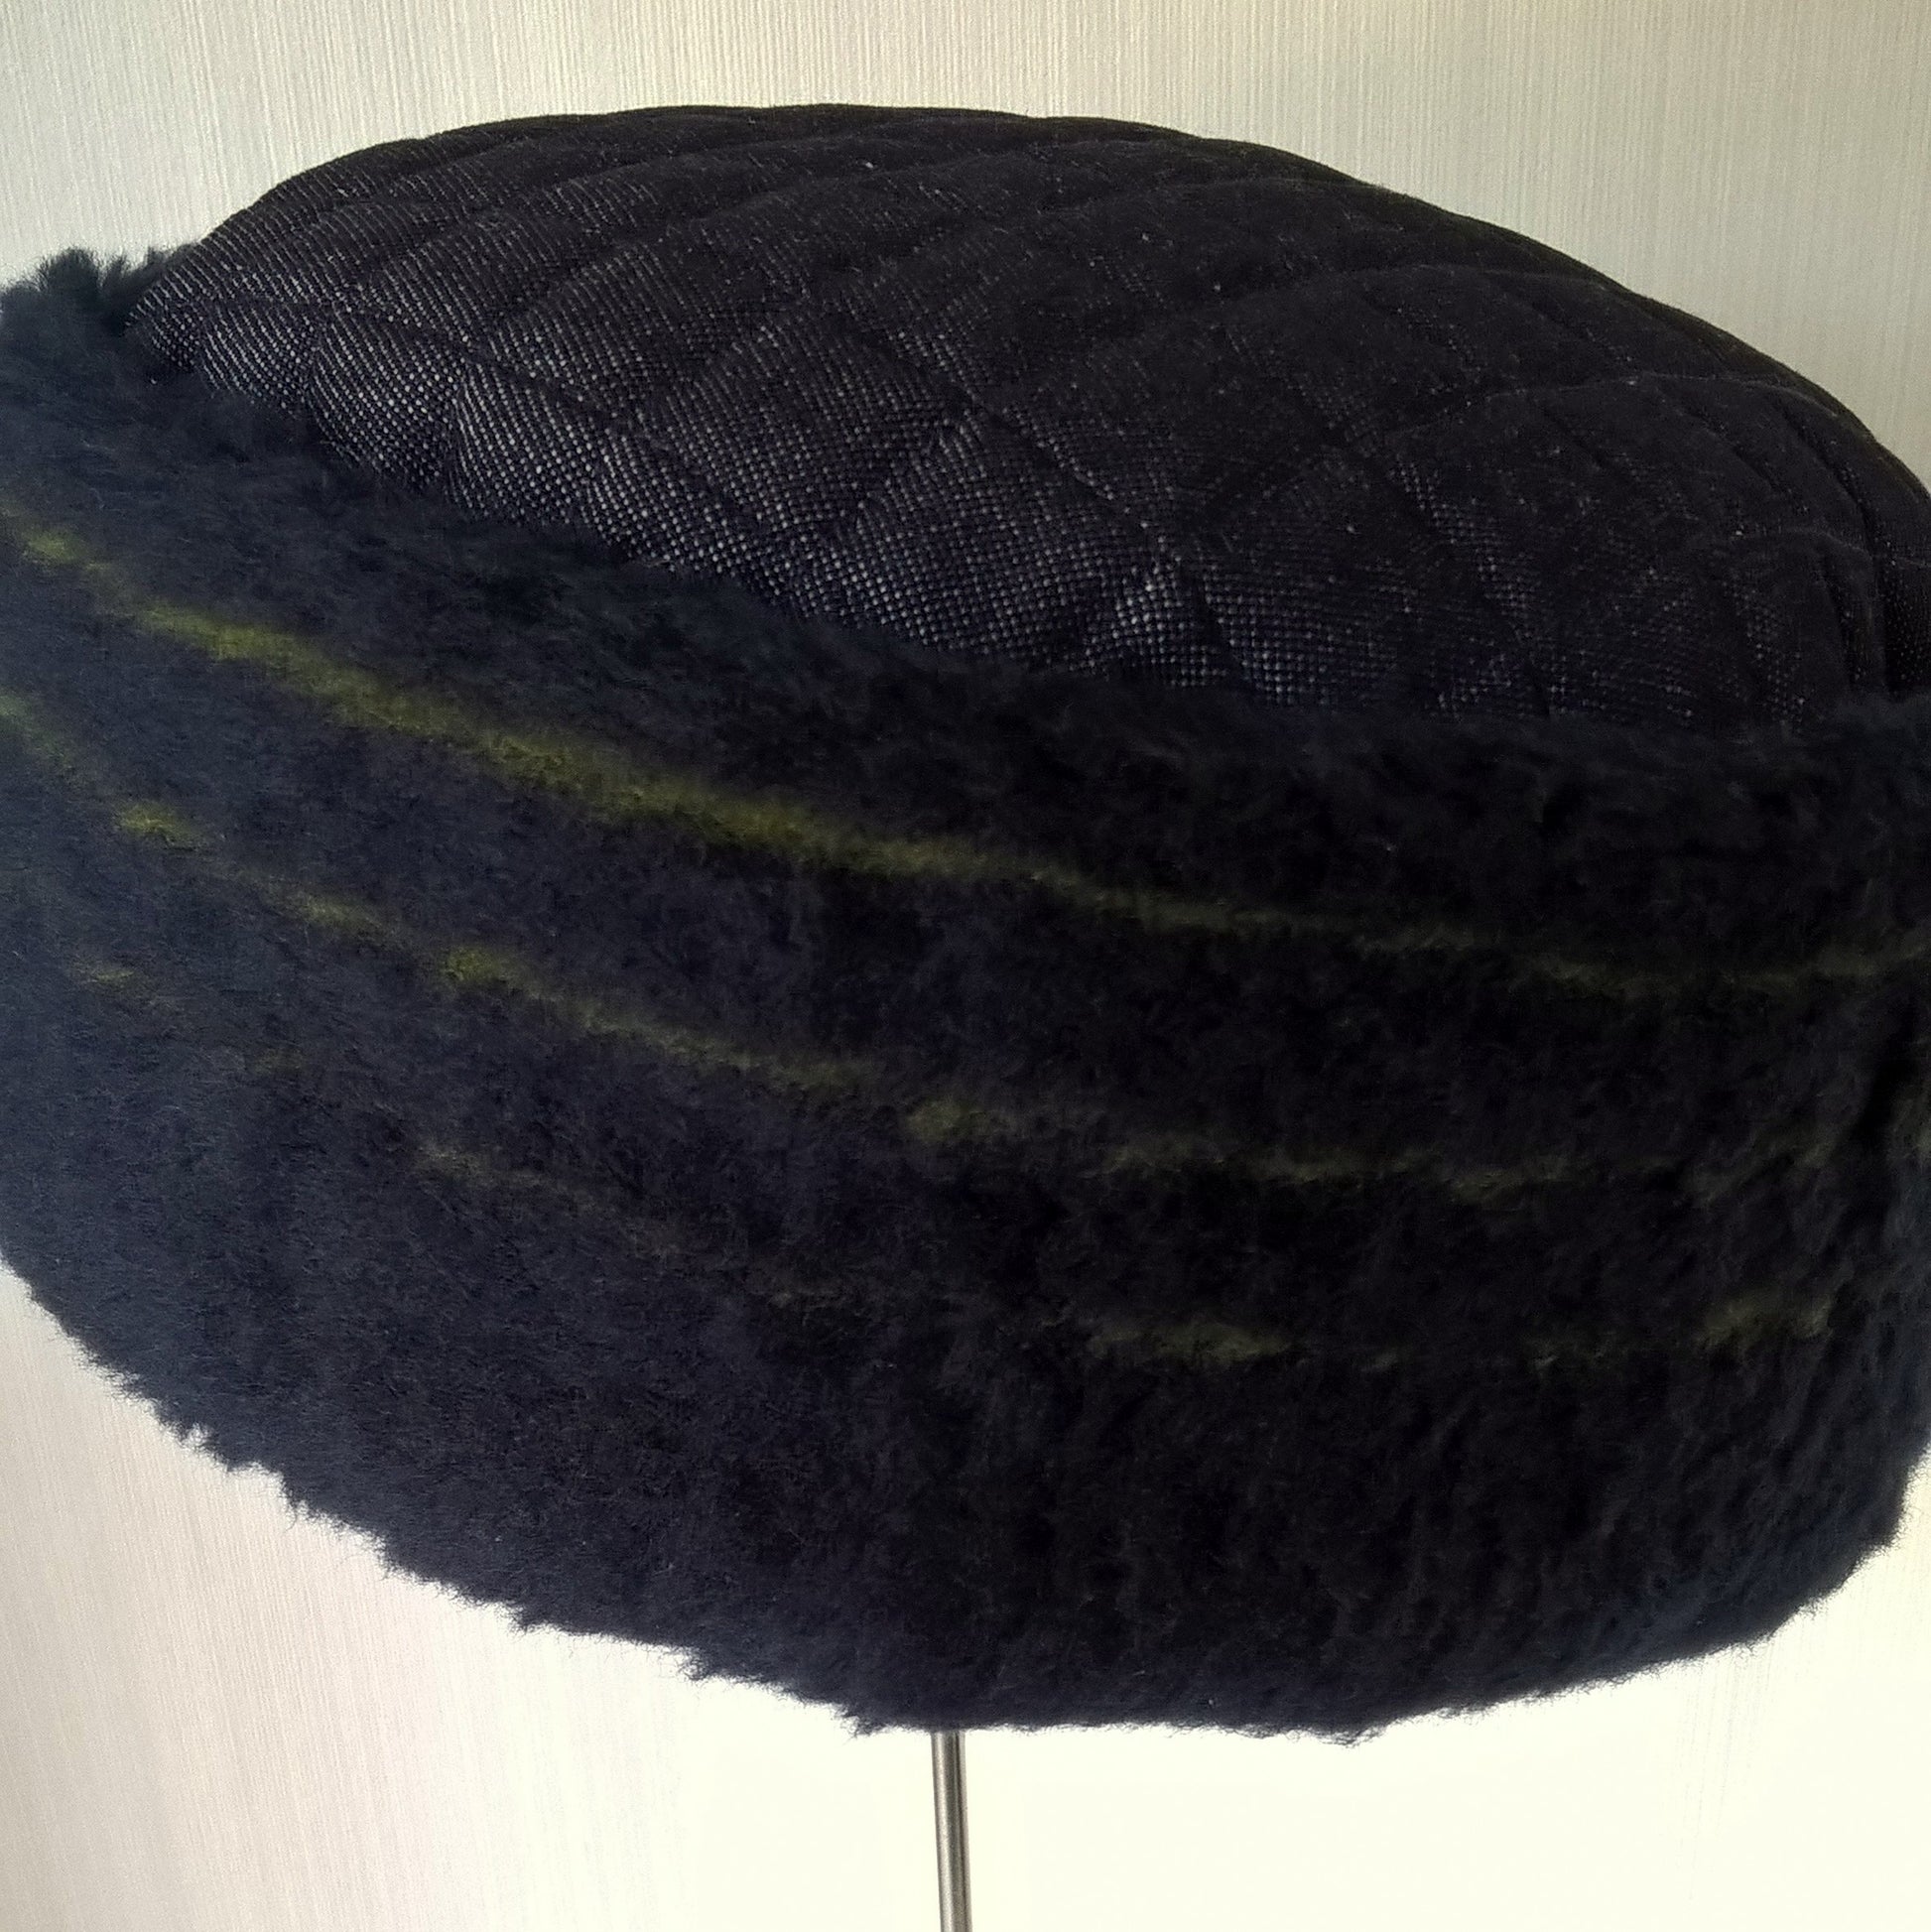 This brimless hat has a plush wool fur crown